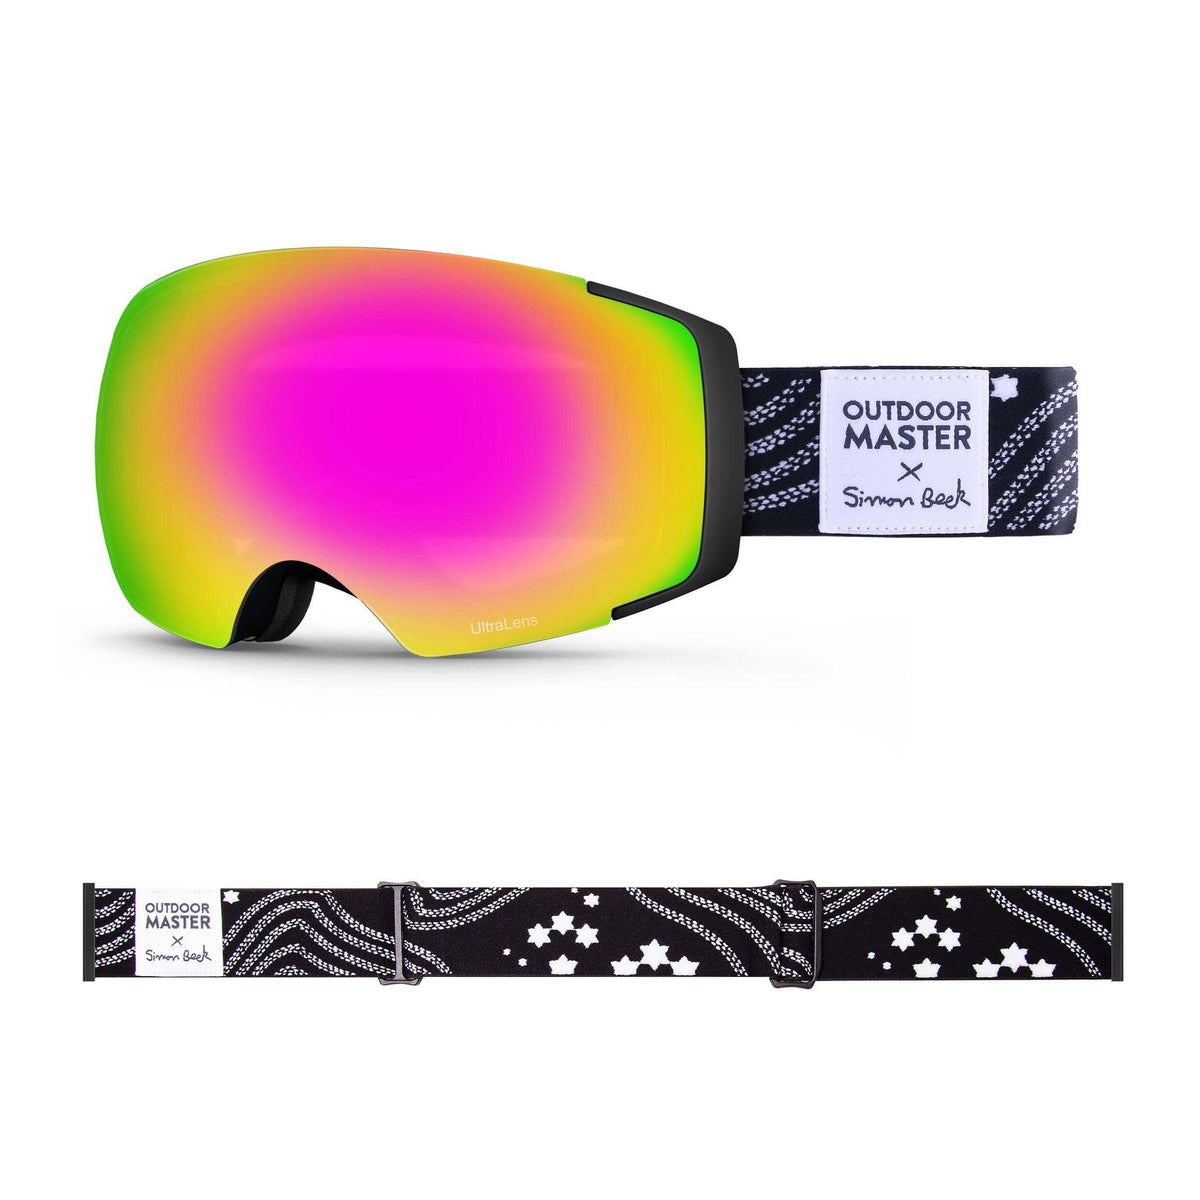 OutdoorMaster x Simon Beck Ski Goggles Pro Series - Snowshoeing Art Limited Edition OutdoorMaster UltraLens VLT 22% Optimized Orange with REVO Pink Star Road-Black